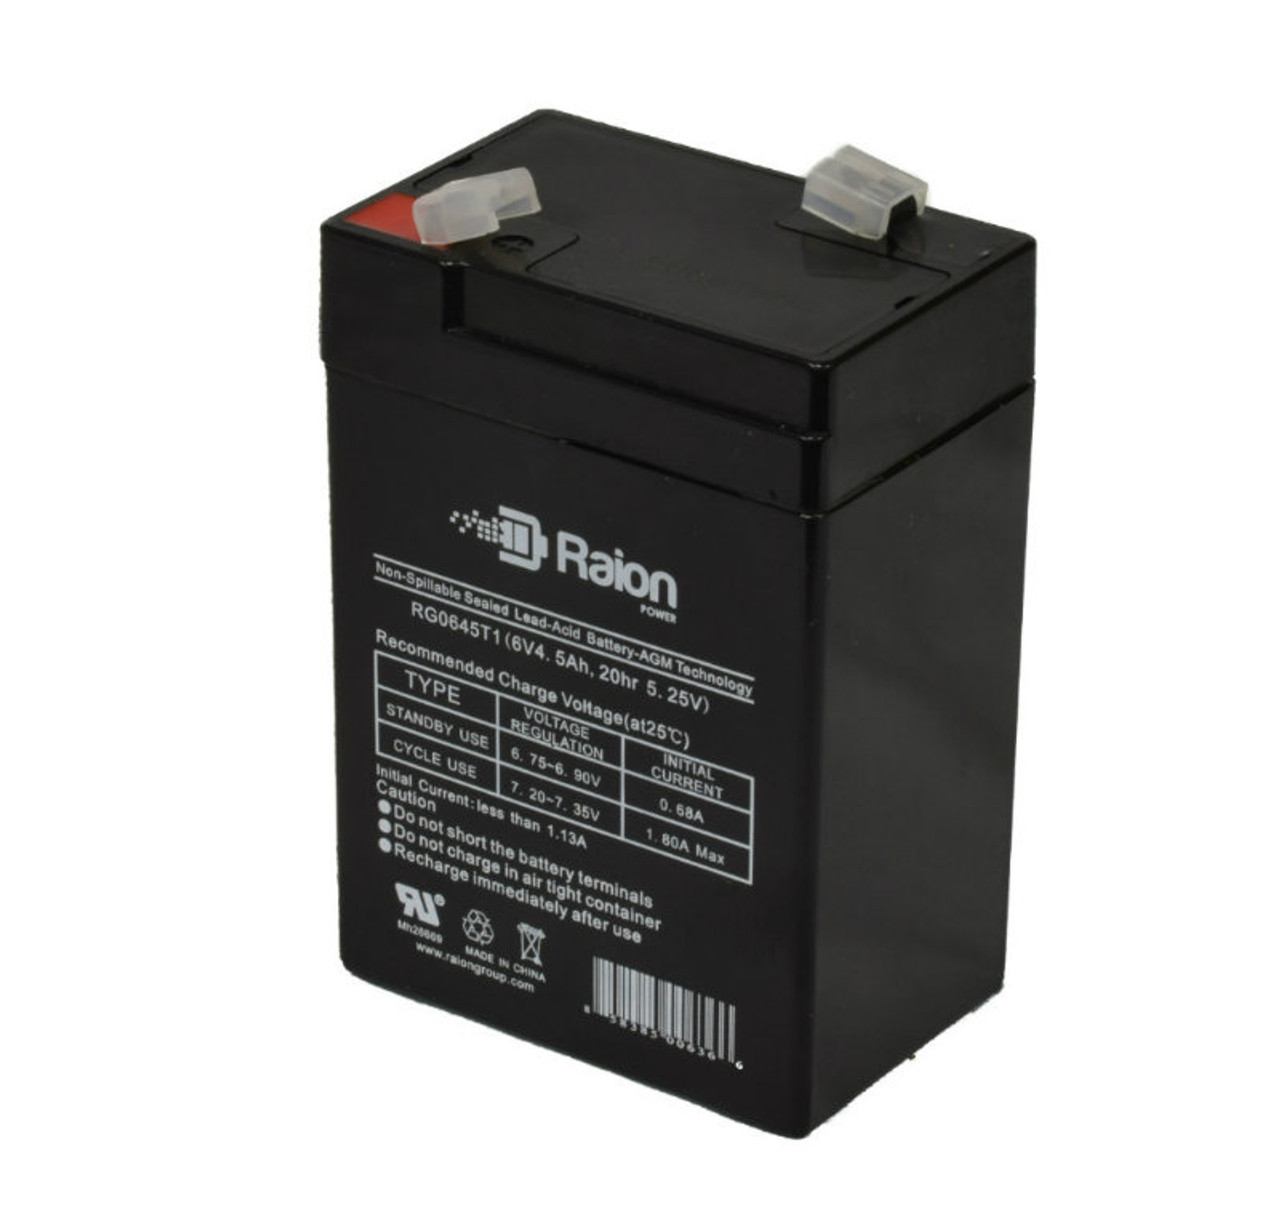 Raion Power RG0645T1 6V 4.5Ah Replacement Battery Cartridge for Alaris Medical Intell Pump 522